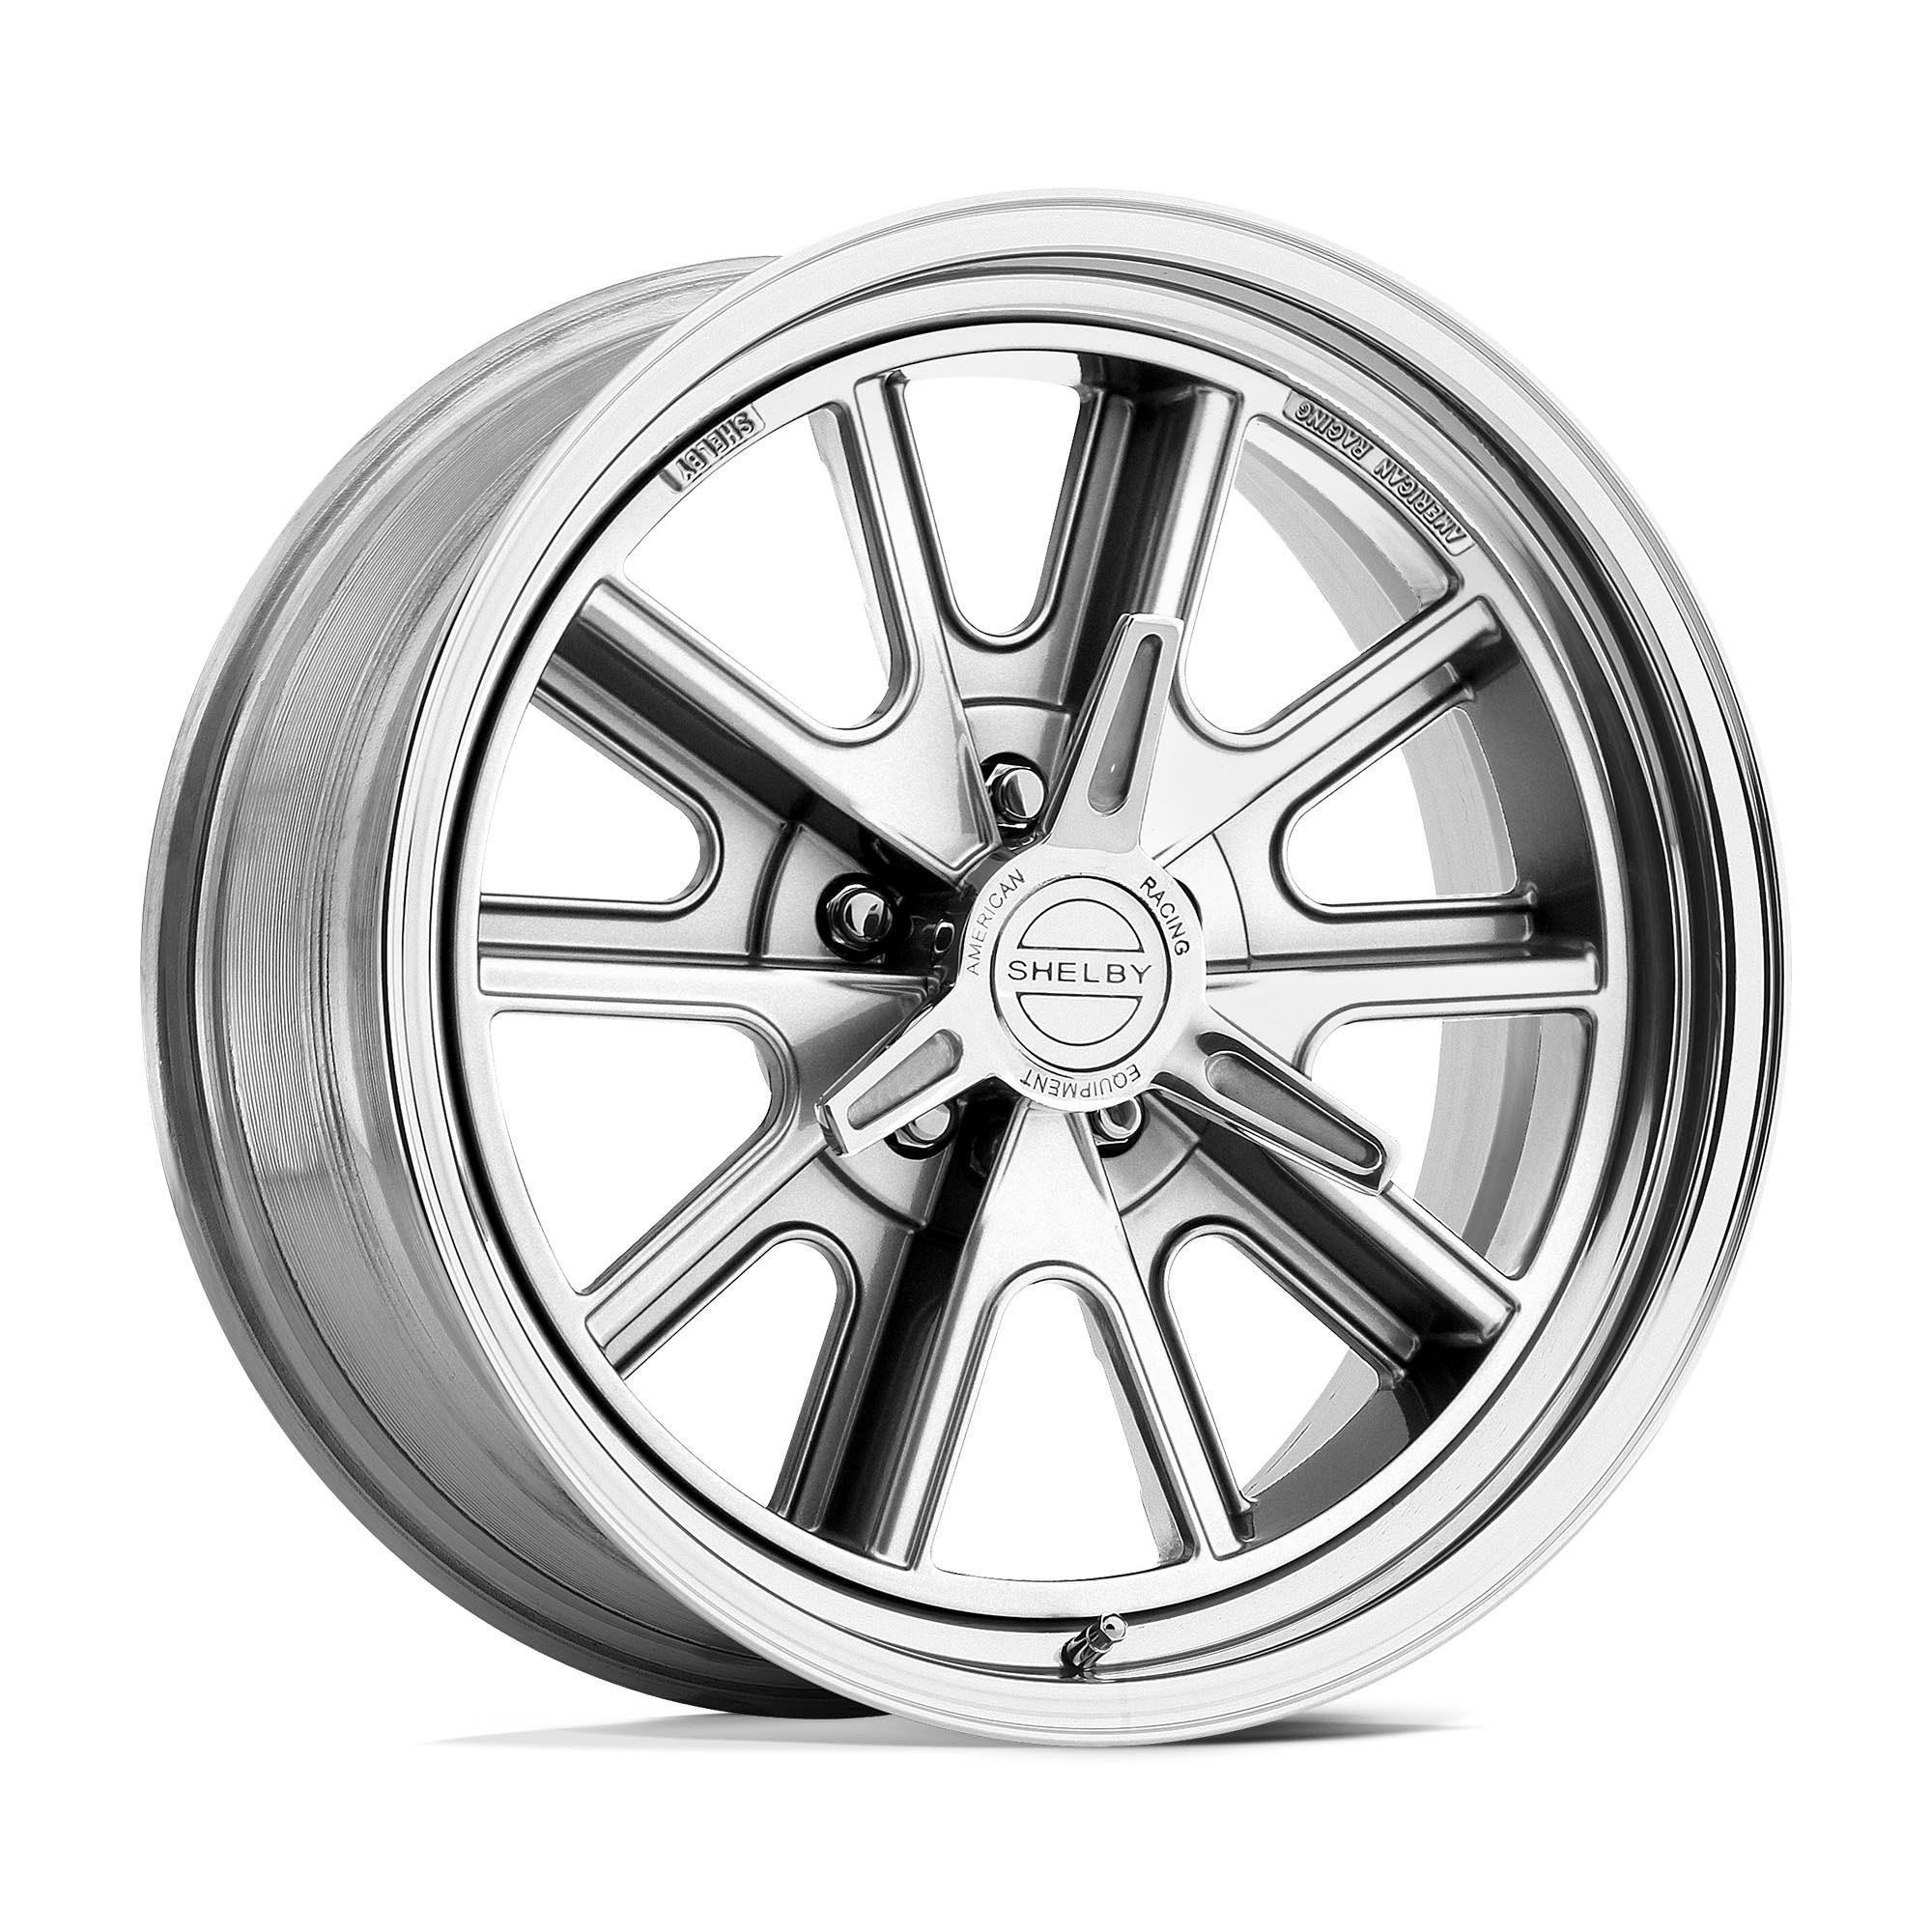 AMERICAN RACING VINTAGE VN427 SHELBY Polished 15 inch + OHTSU AT4000 SO - 215/75/15